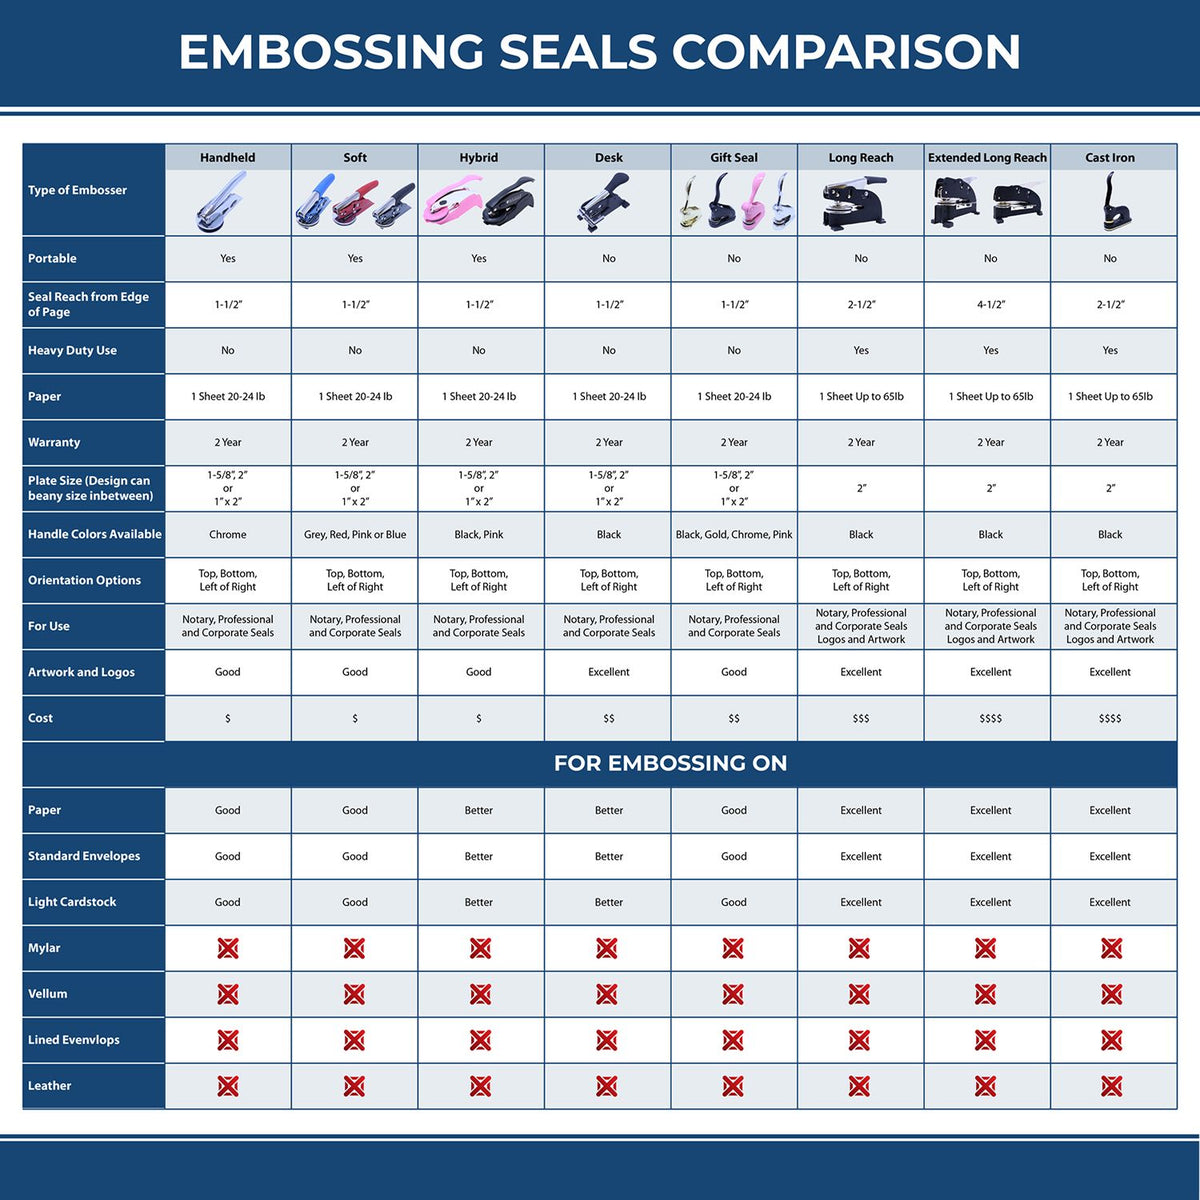 A comparison chart for the different types of mount models available for the Long Reach Maryland PE Seal.